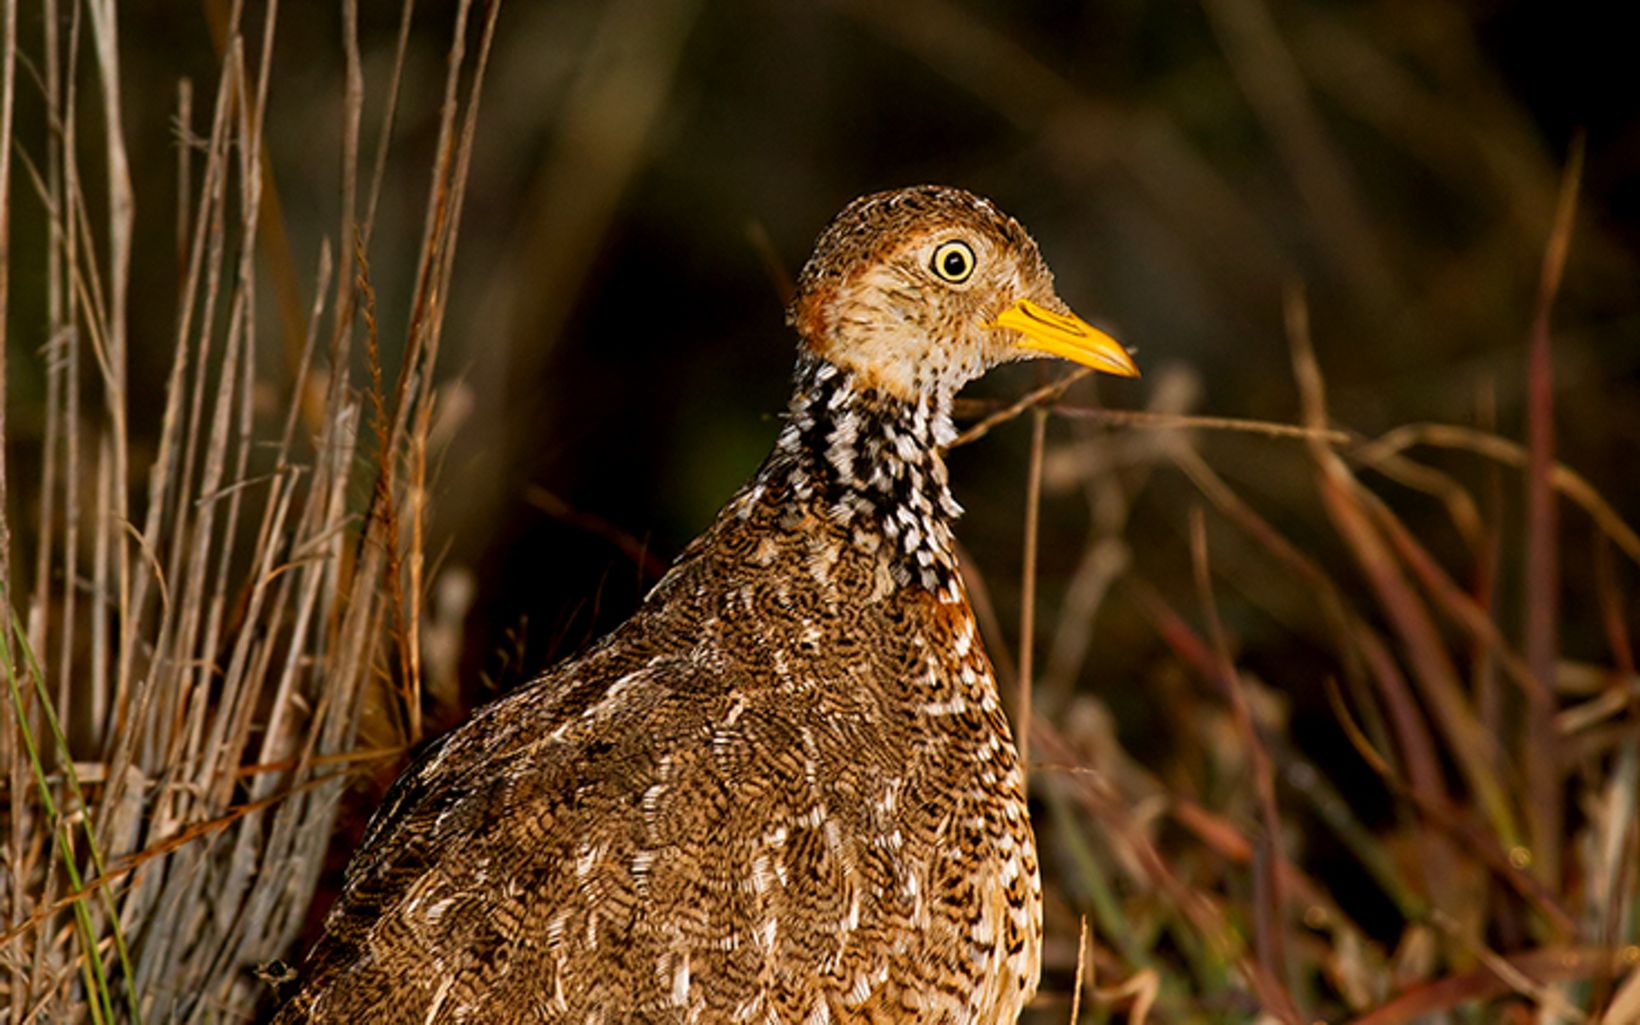 Plains-wanderer (female) has a reddish bib with a contrasting black and white speckle © Patrick Kavanagh, Wikimedia Commons